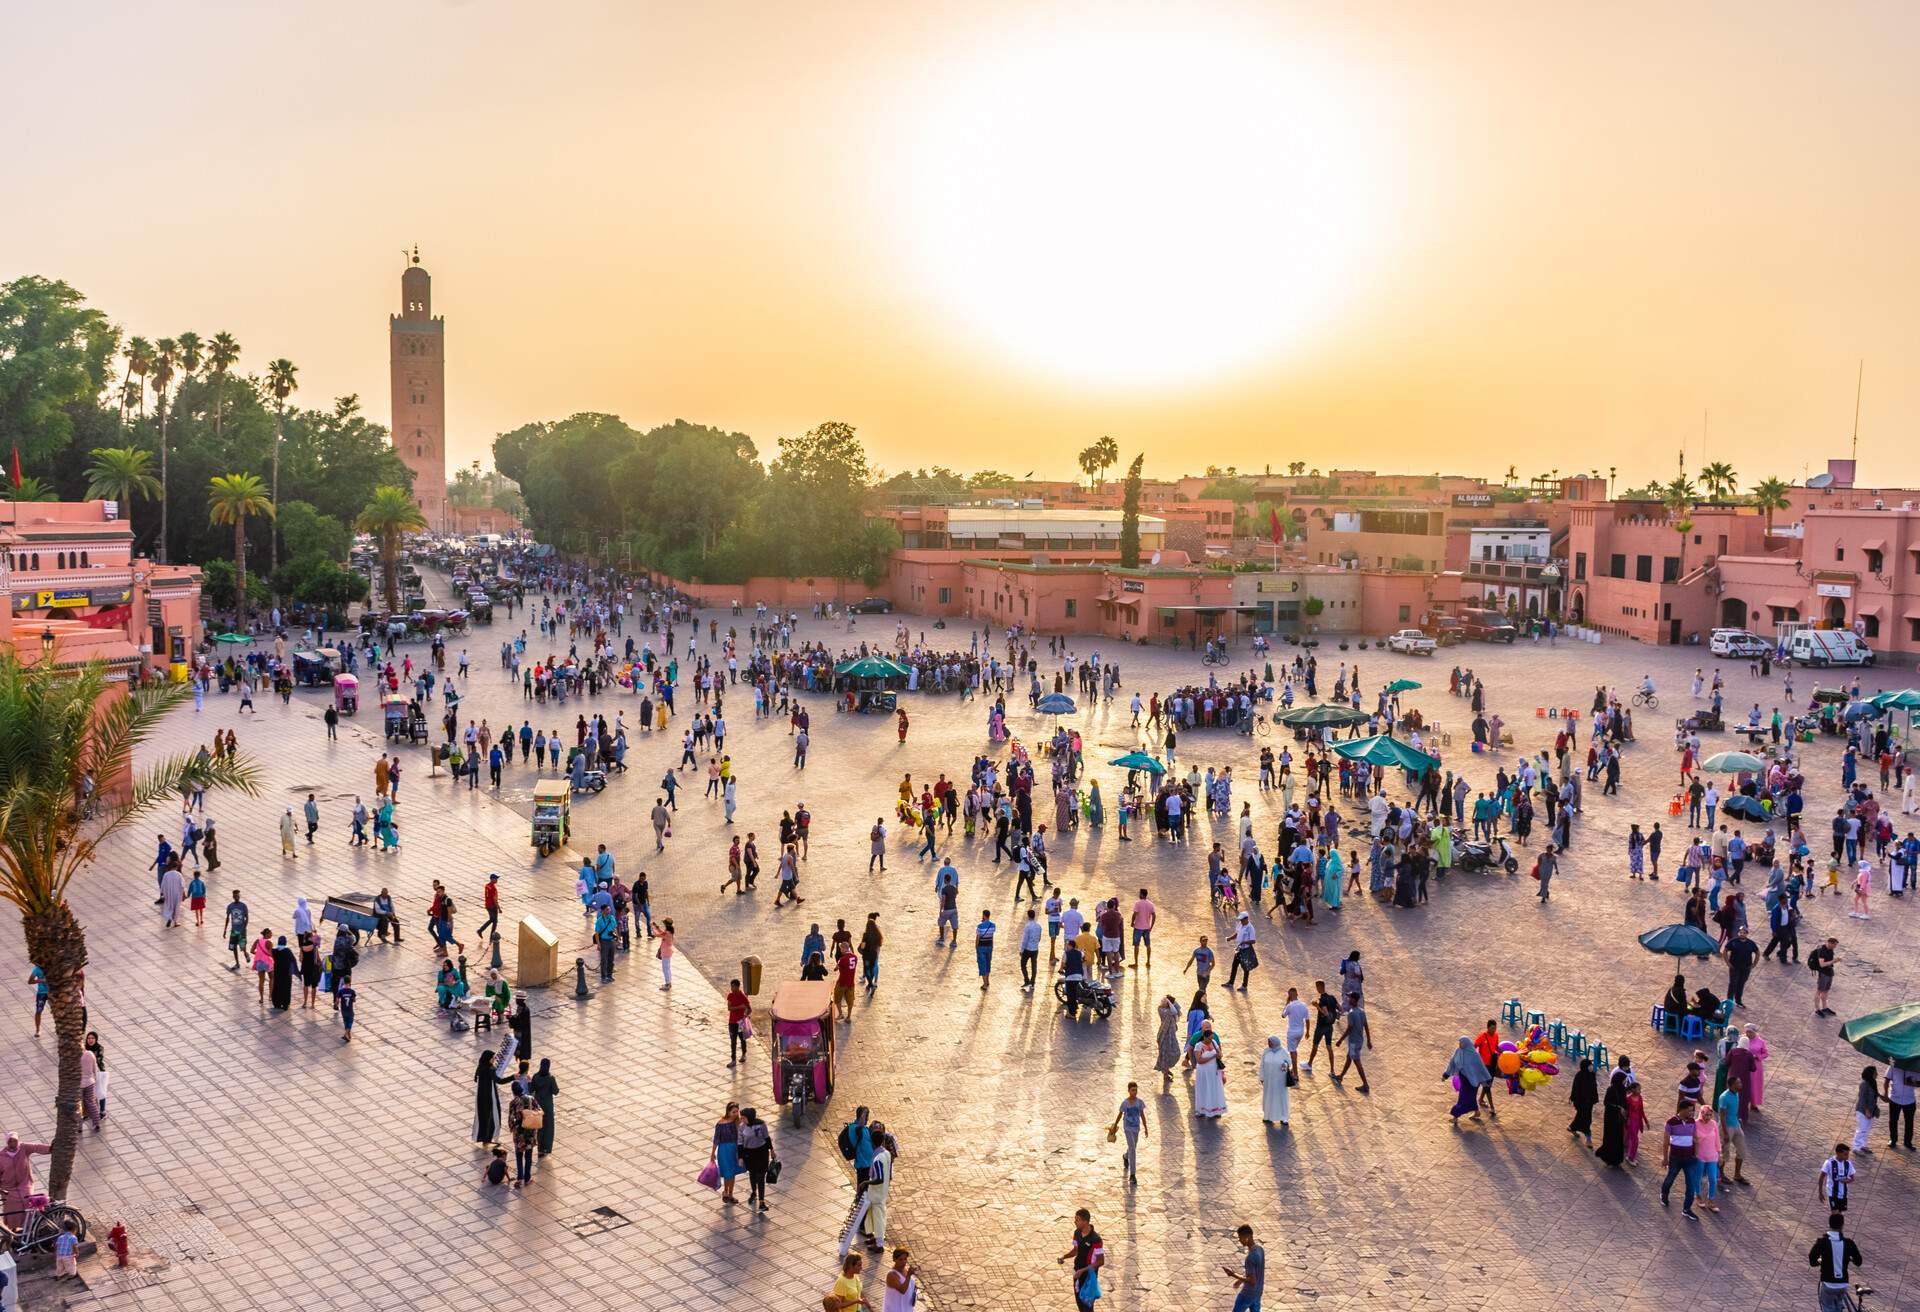 A market square crowded with travellers and locals at sunset.